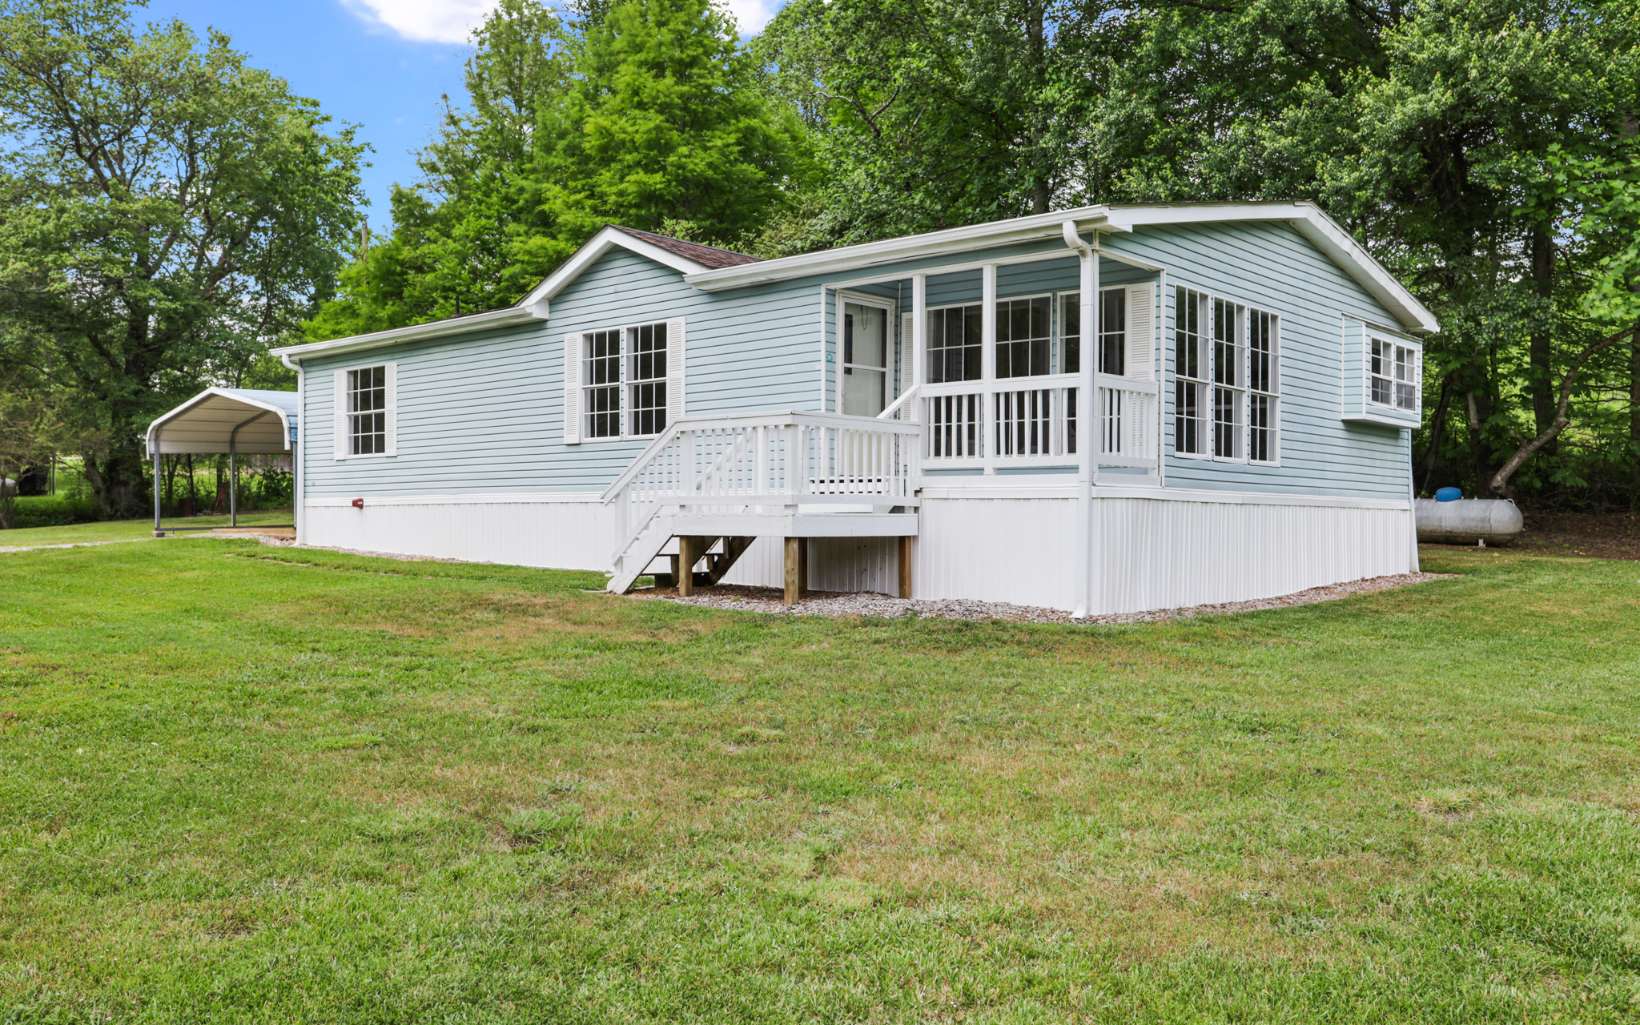 What a location! Just minutes from downtown Blairsville, This 3/2 double wide is sitting in one of north Georgia's most highly desirable areas. It has a picturesque setting with a beautiful garden area and branch running along the front of the property. This is a great low maintenance property, and is a VERY affordable investment for most budgets!